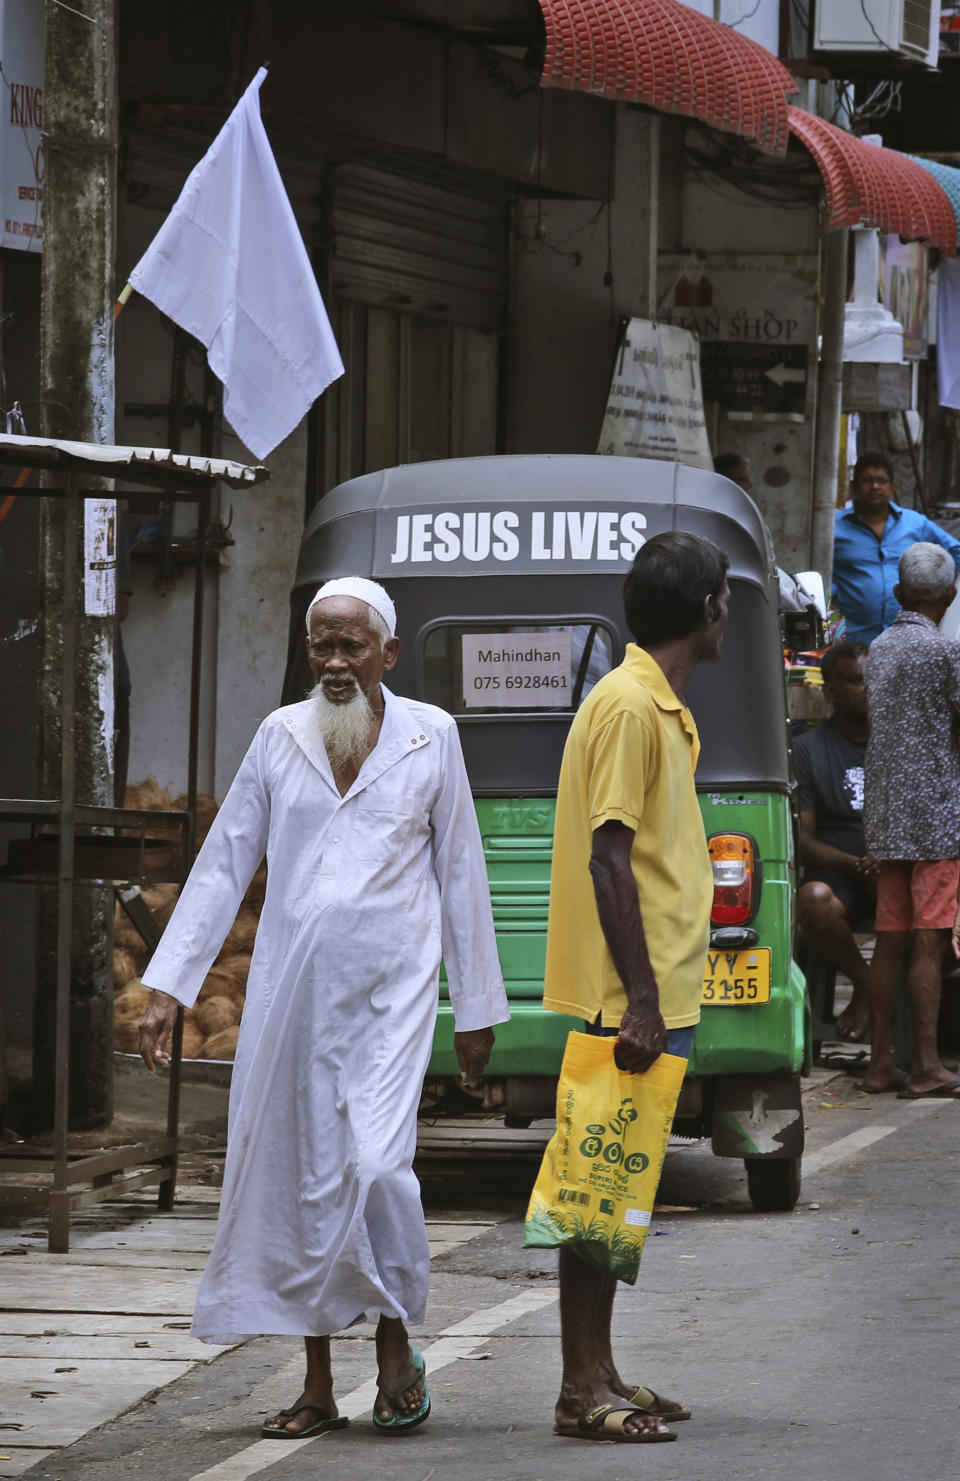 An elderly Sri Lankan Muslim man walks across a street in Colombo, Sri Lanka, Monday, April 29, 2019. The Catholic Church in Sri Lanka said Monday that the government should crack down on Islamic extremists with more vigor "as if on war footing" in the aftermath of the Easter bombings. Meanwhile, the government has banned all kinds of face coverings that may conceal people's identities. The emergency law, which took effect Monday, prevents Muslim women from veiling their faces. (AP Photo/Manish Swarup)